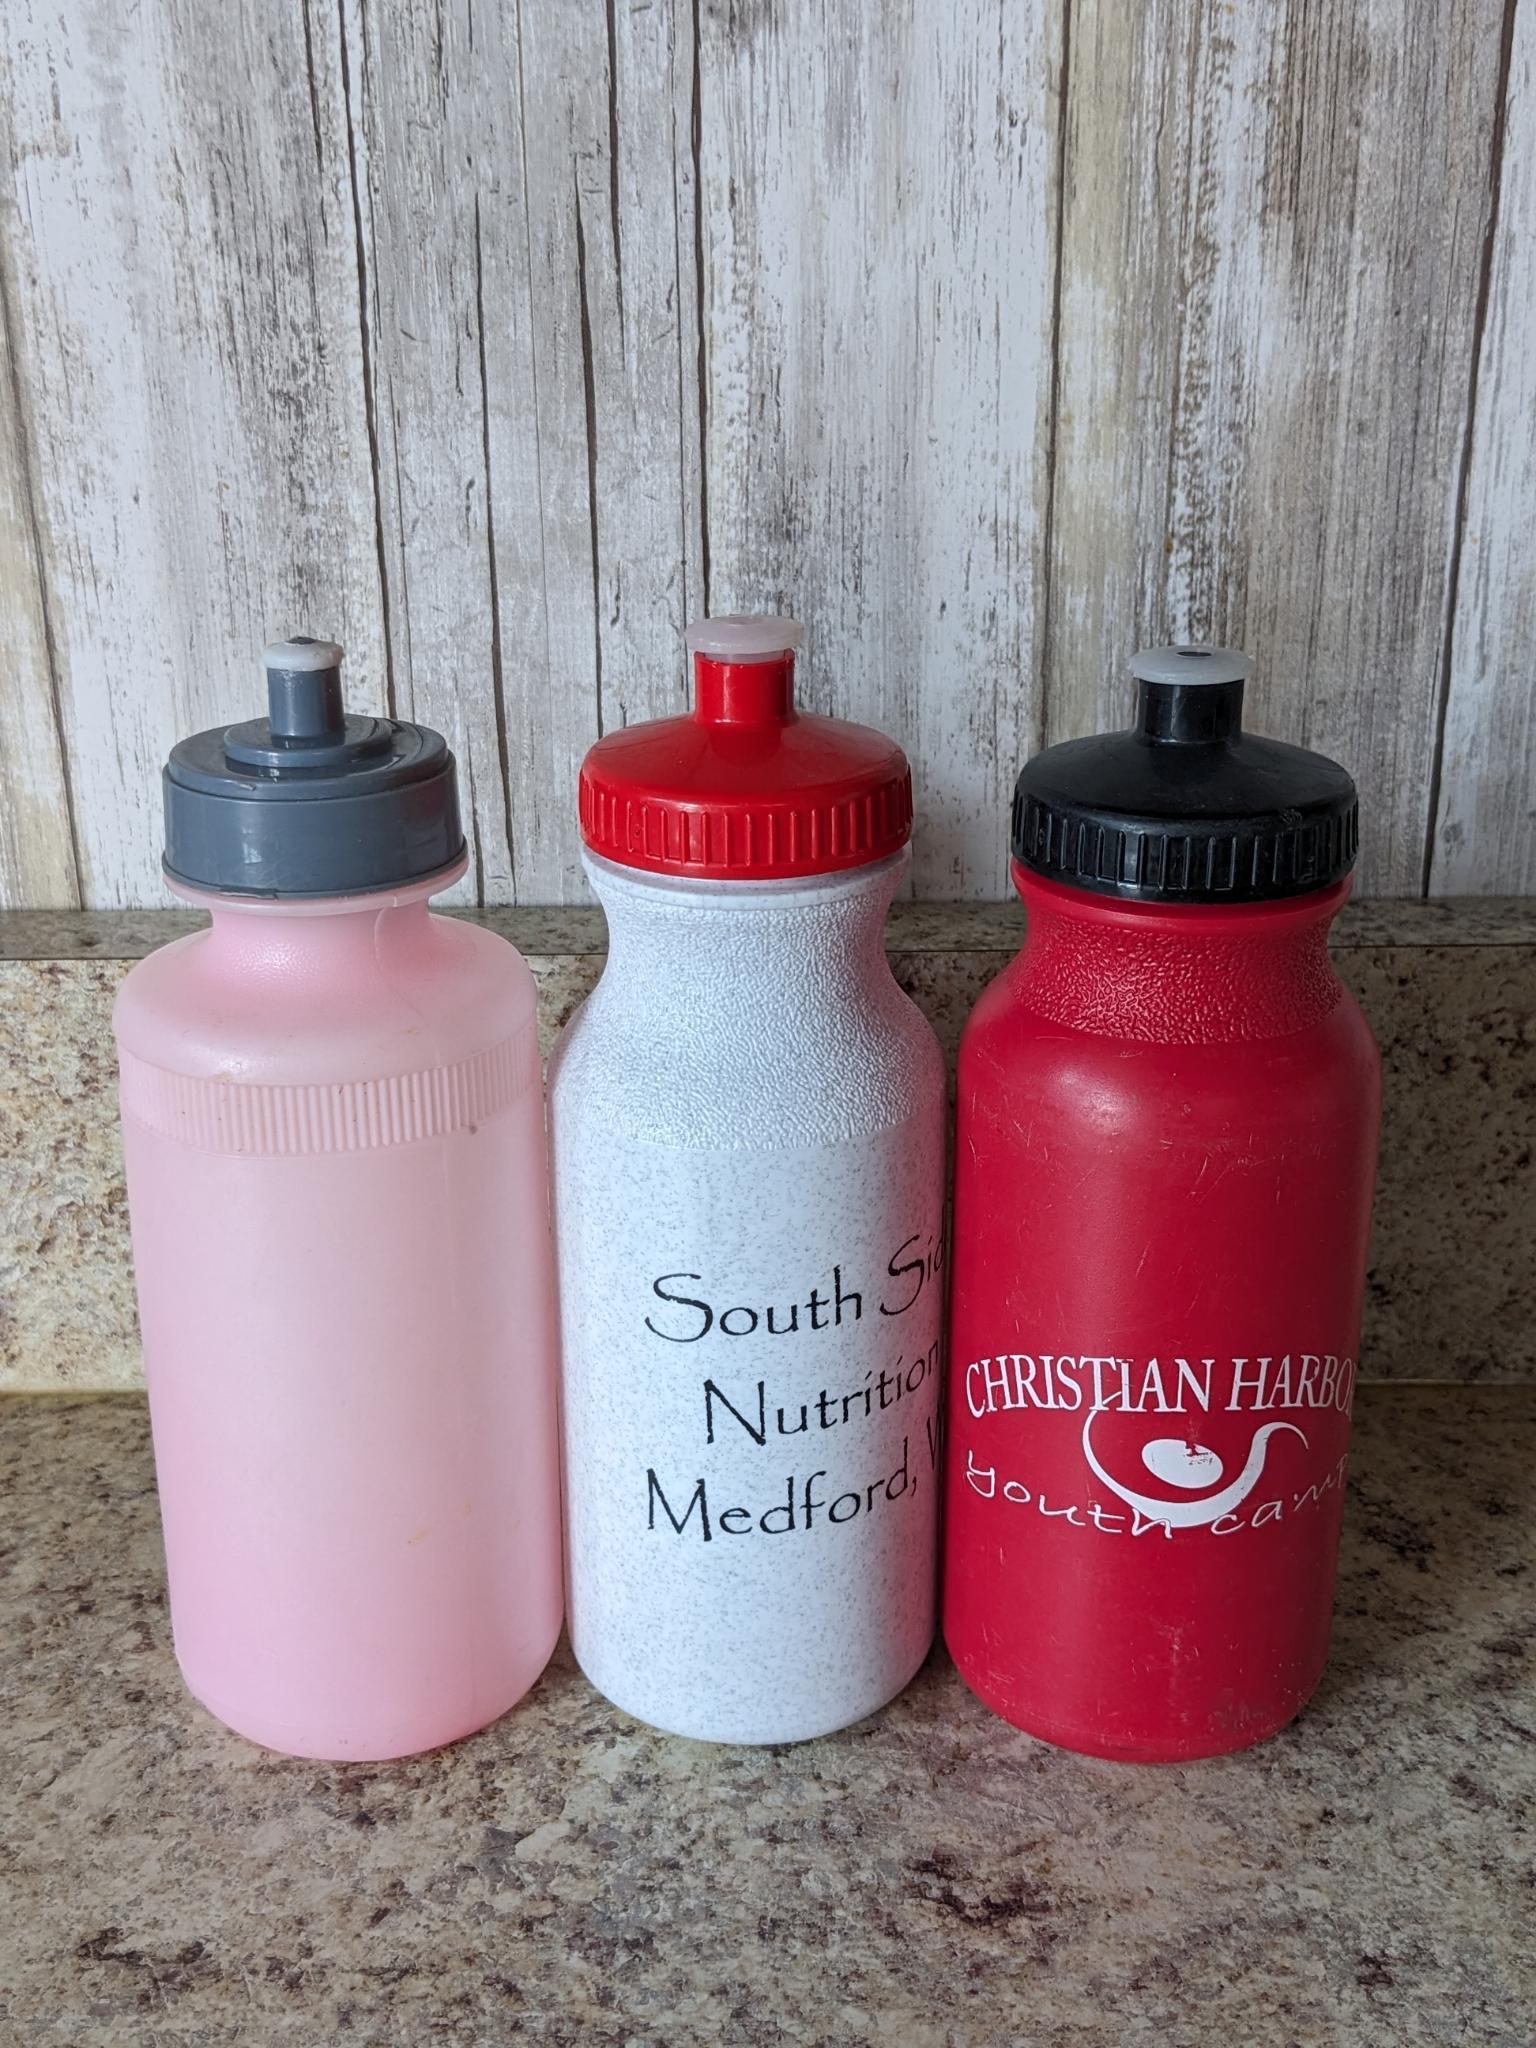 Assorted water bottles and cups as pictured.